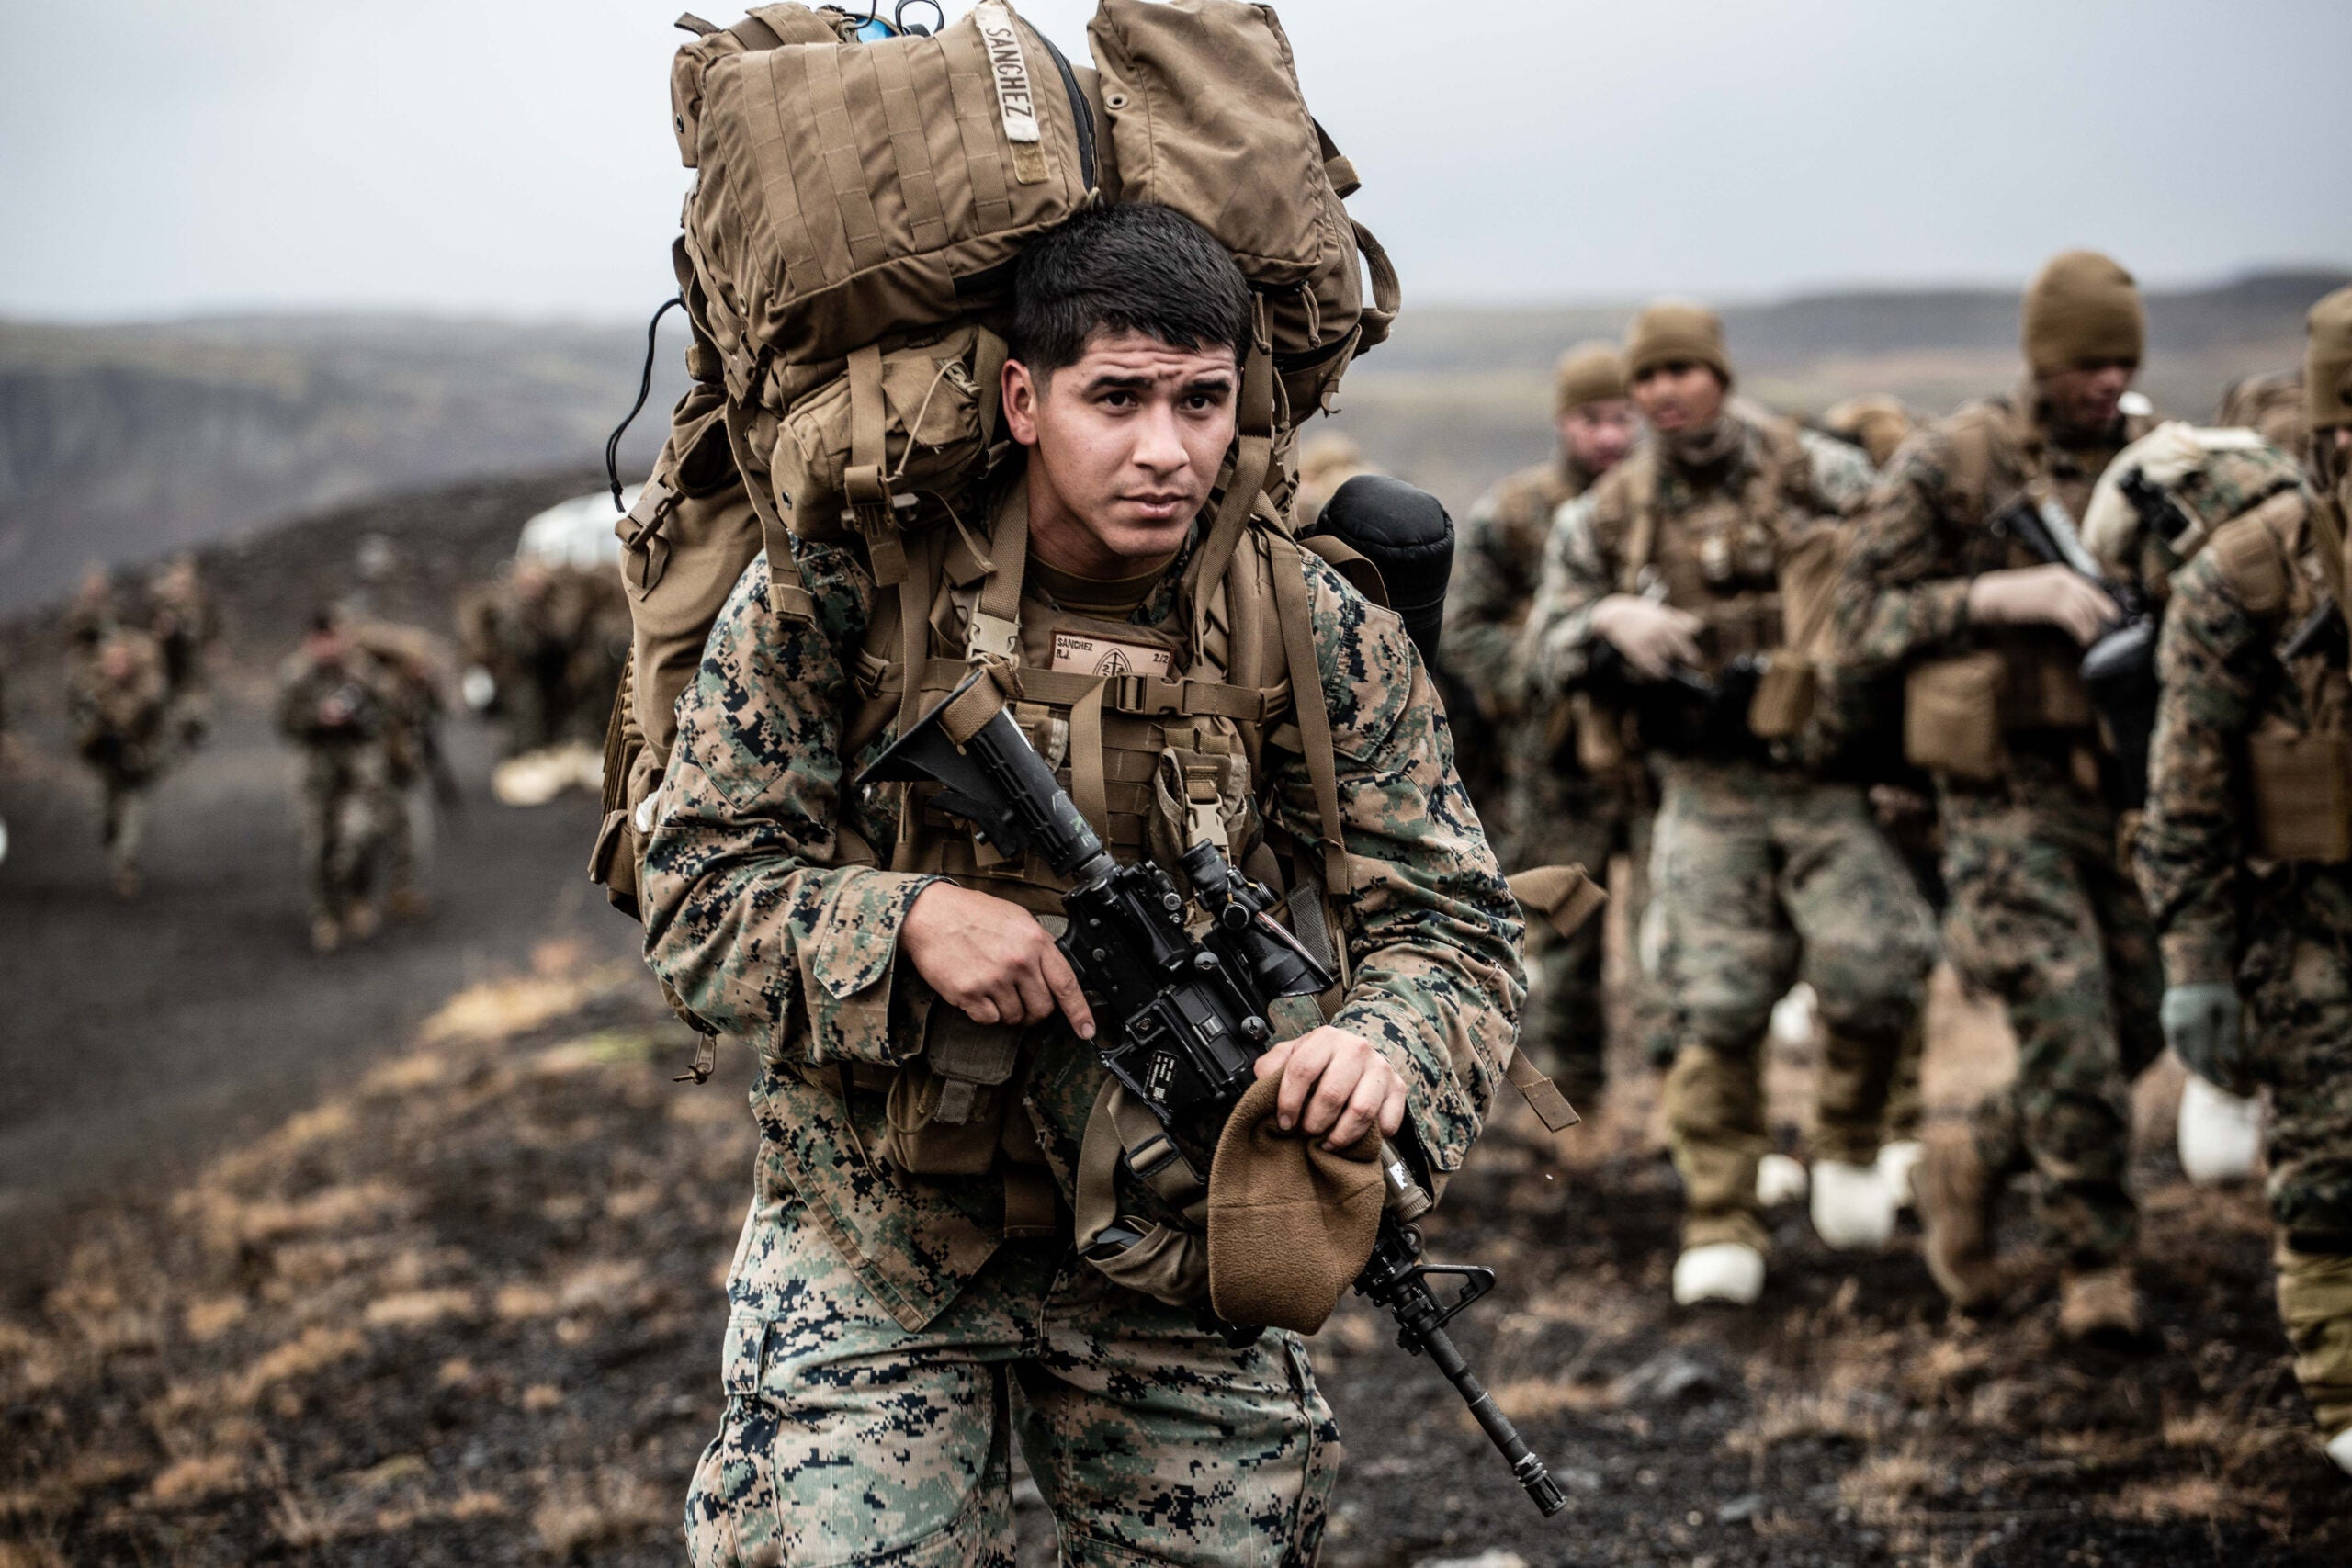 The Marine Corps is considering merging all infantry jobs into just one MOS.